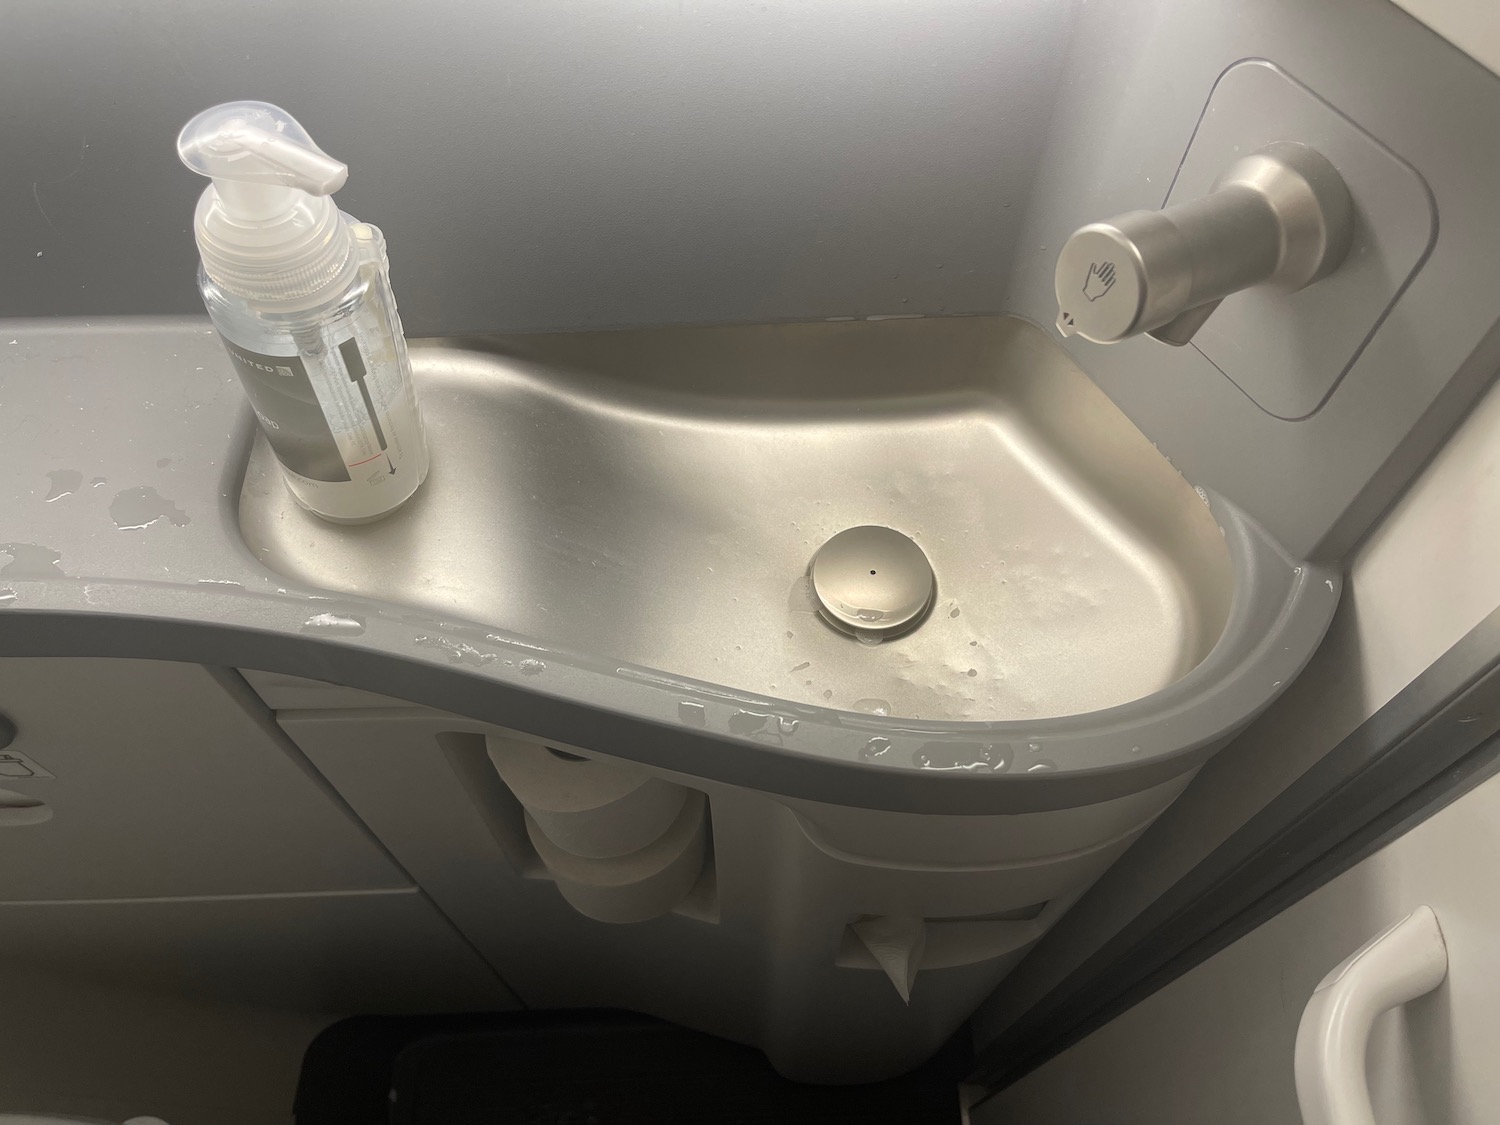 a sink with soap dispenser and a bottle on it